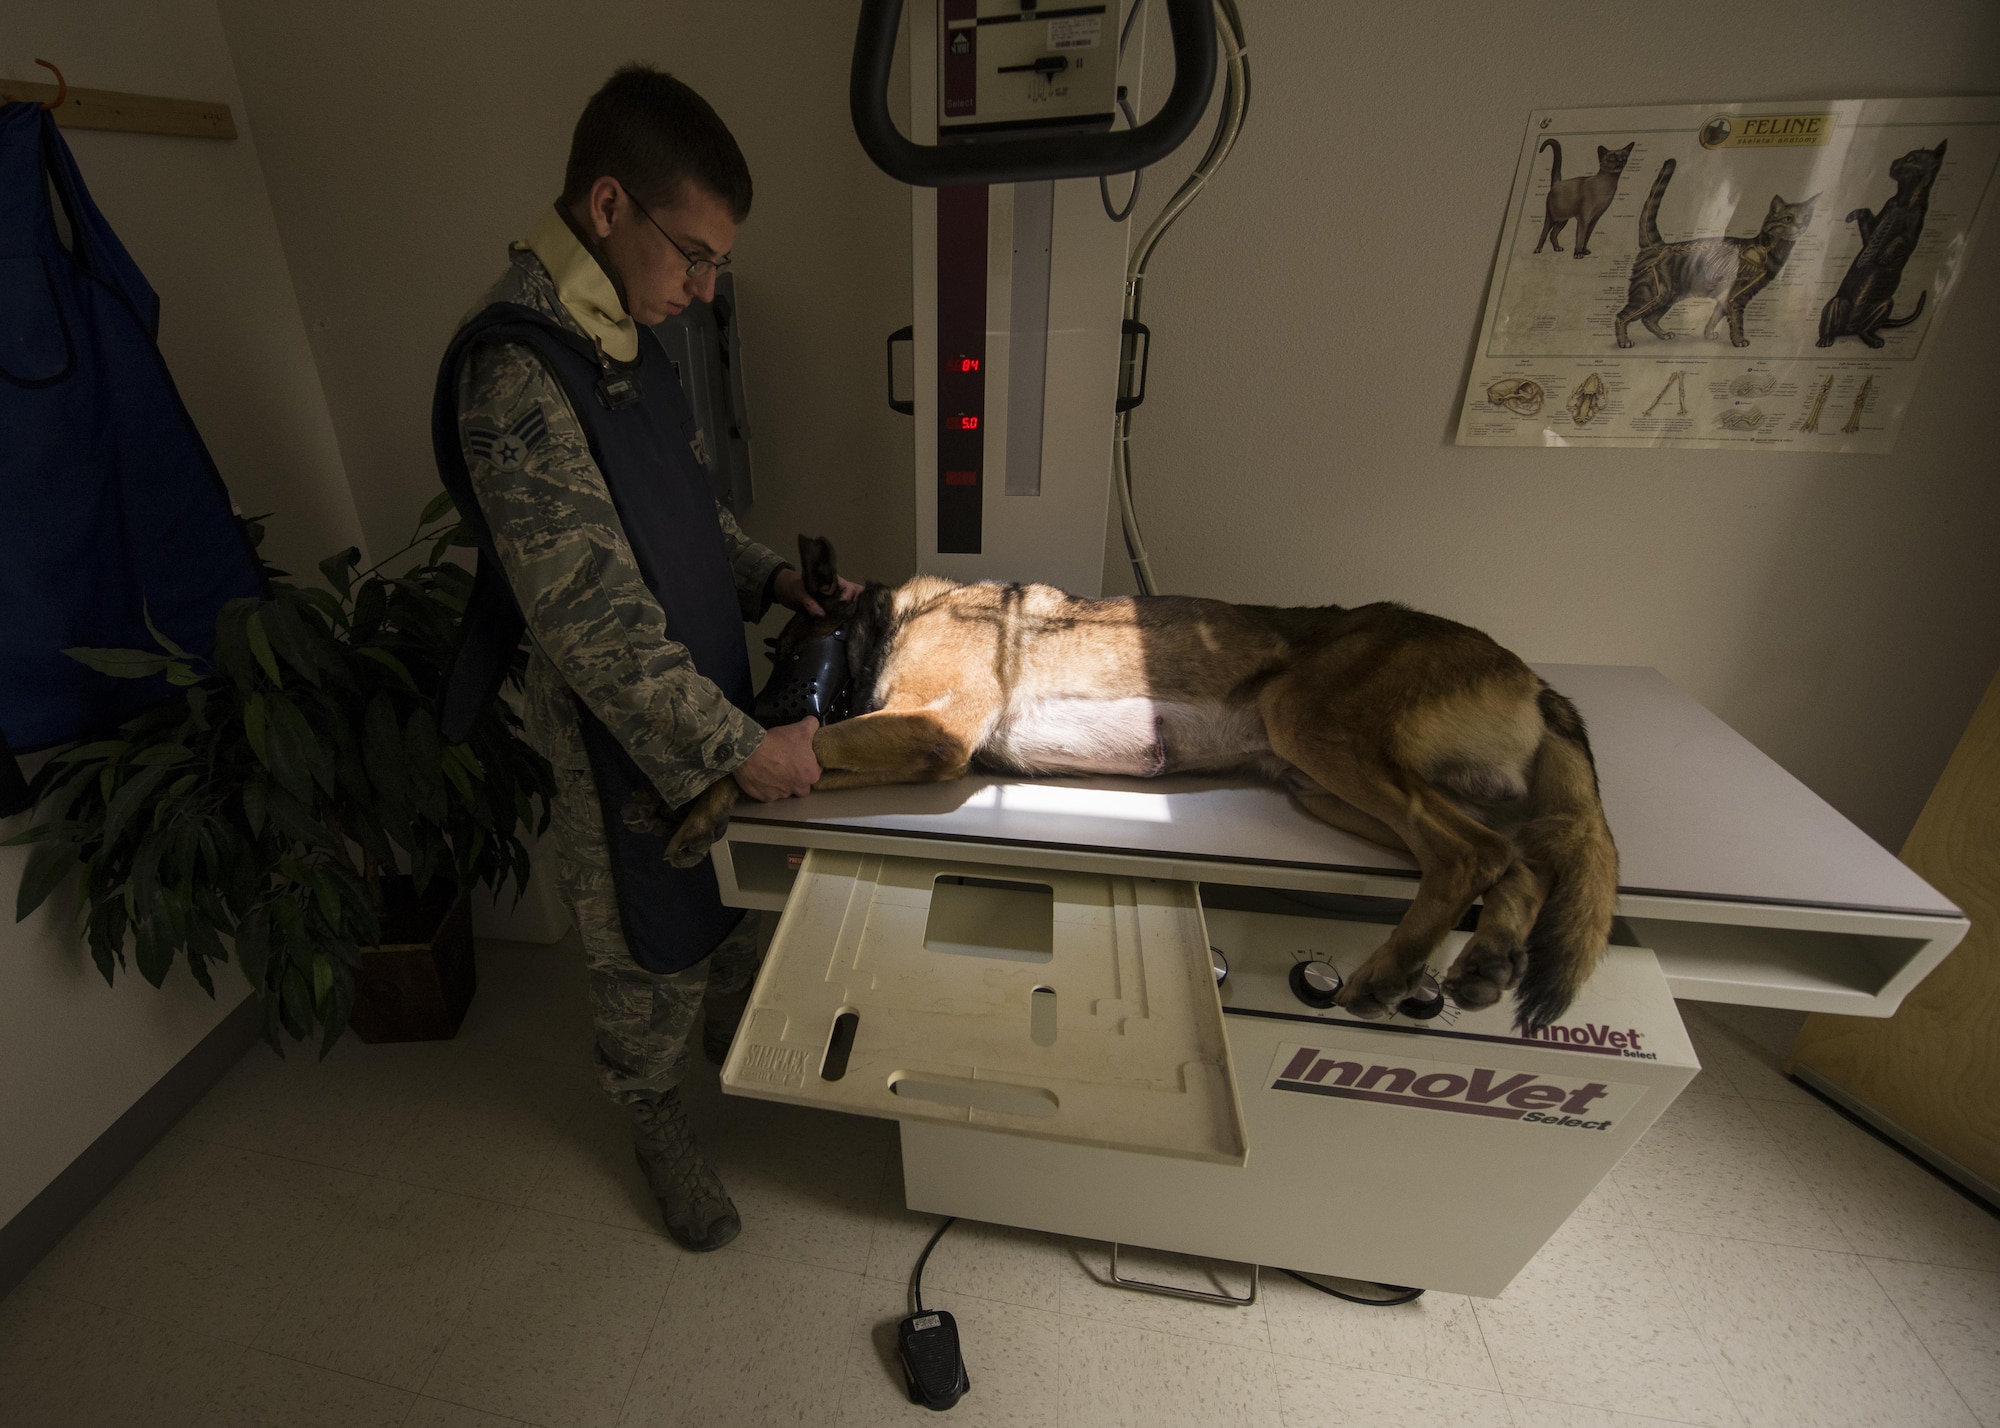 Staff Sgt. David, a military working dog handler with the 49th Security Forces Squadron, assists his military working dog, Dylan, during an x-ray scan at the veterinary clinic at Holloman Air Force Base, N.M. Dec. 13, 2016. Four of Holloman’s MWDs are battling health and medical related issues. To prevent and combat illness, the dogs routinely attend dental and medical checkups at the veterinary clinic on base. (Last names are being withheld due to operational requirements. U.S. Air Force photo by Airman 1st Class Alexis P. Docherty)